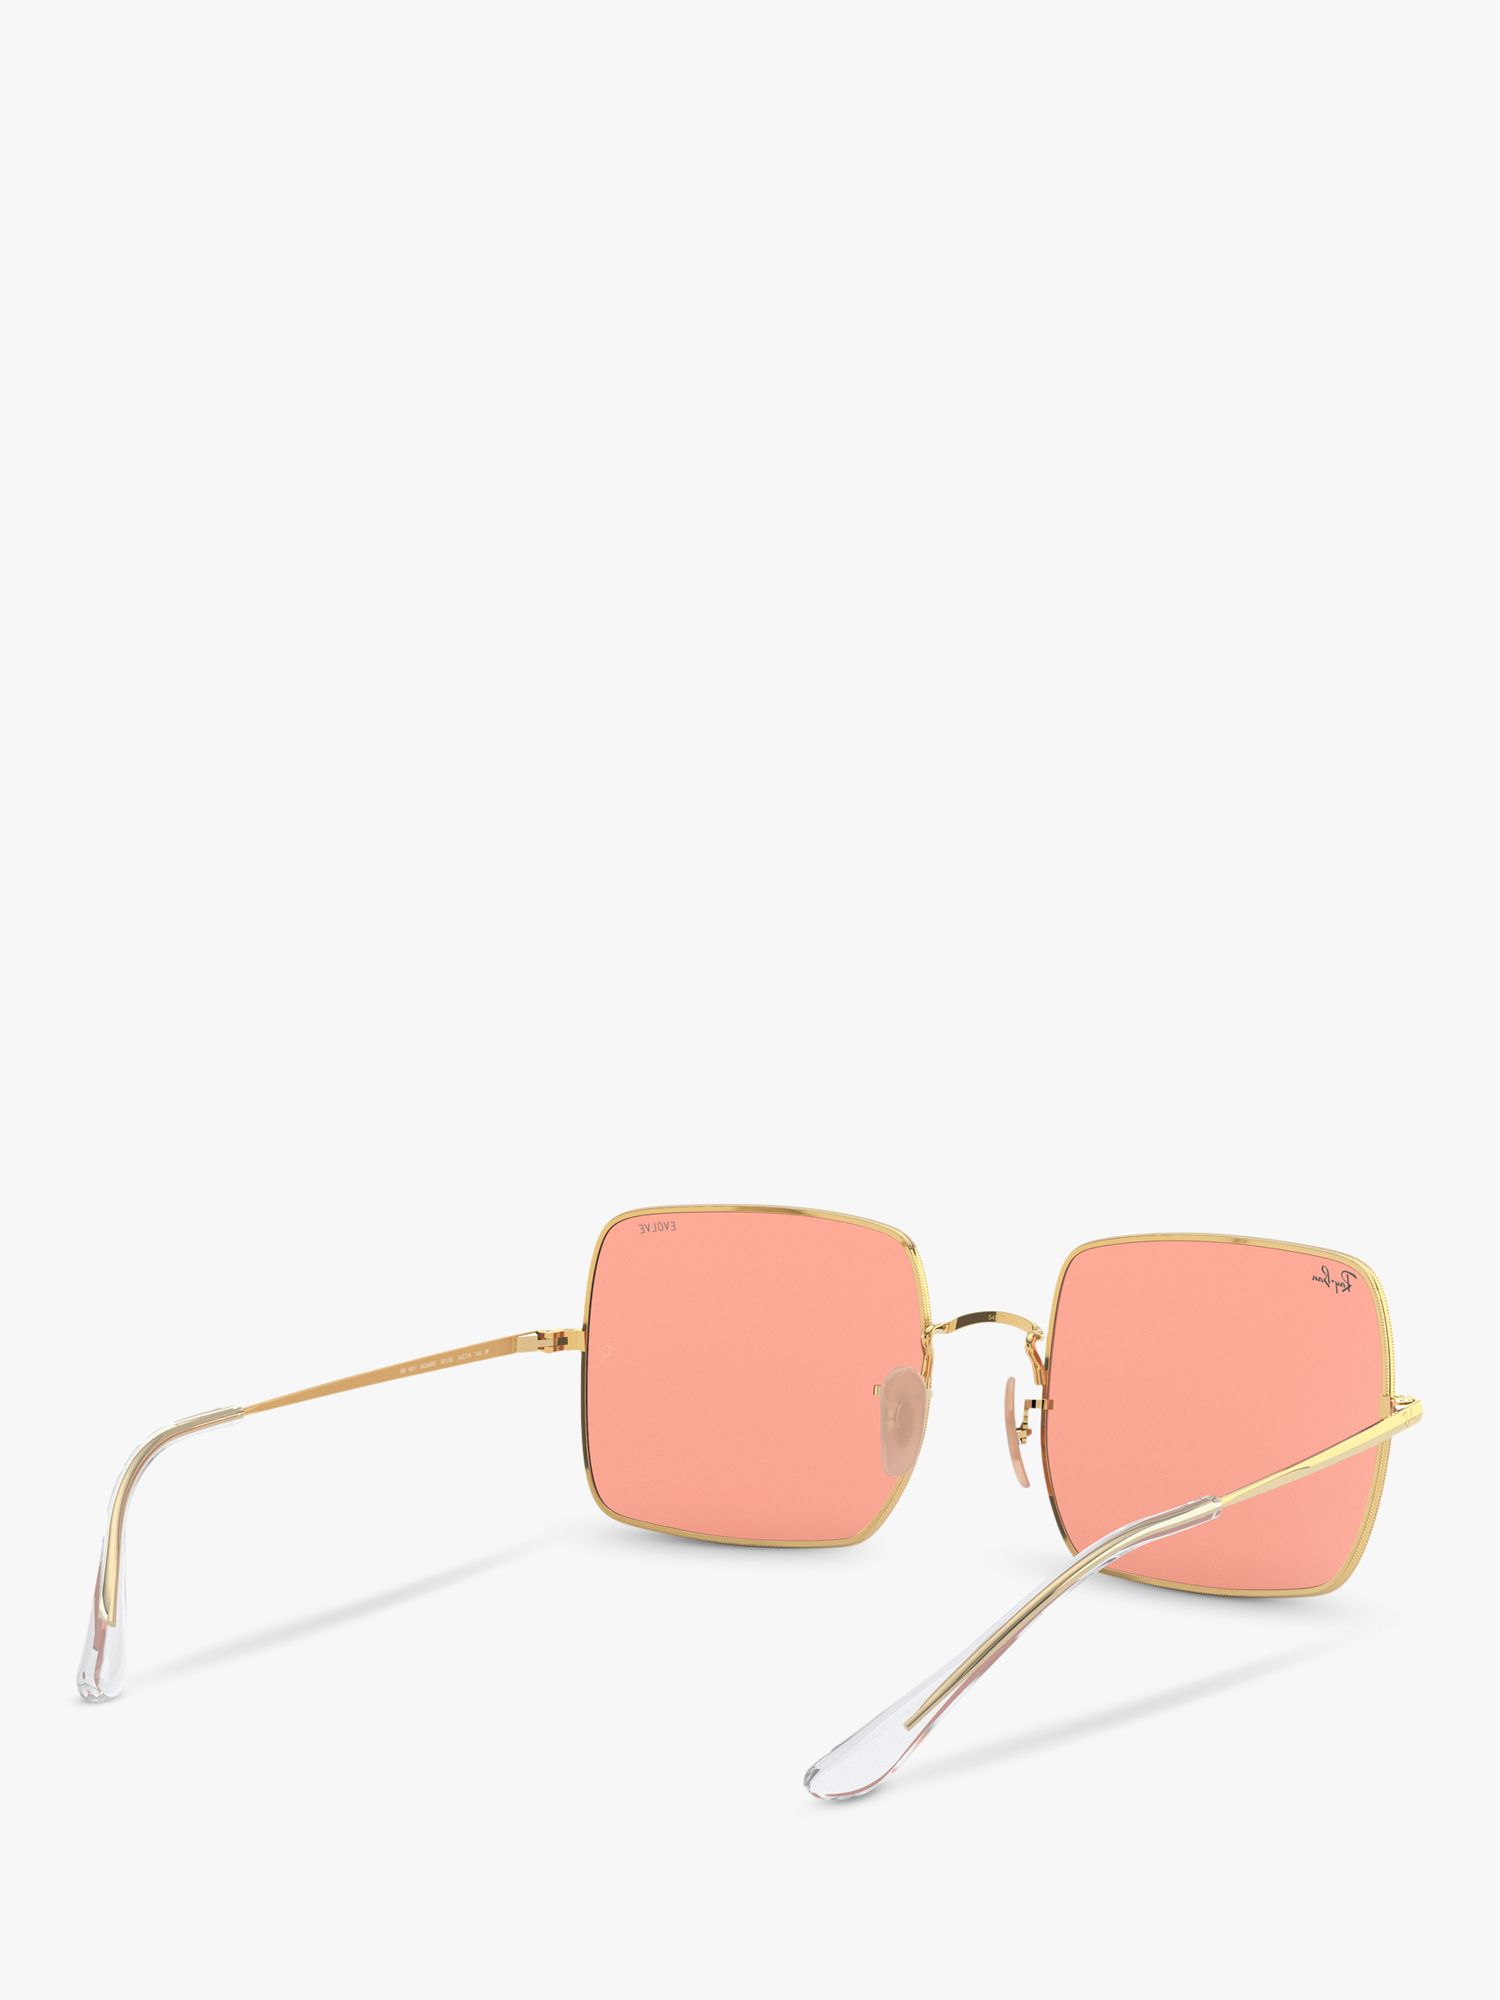 Ray-Ban RB1971 Unisex Square Sunglasses, Gold/Pink